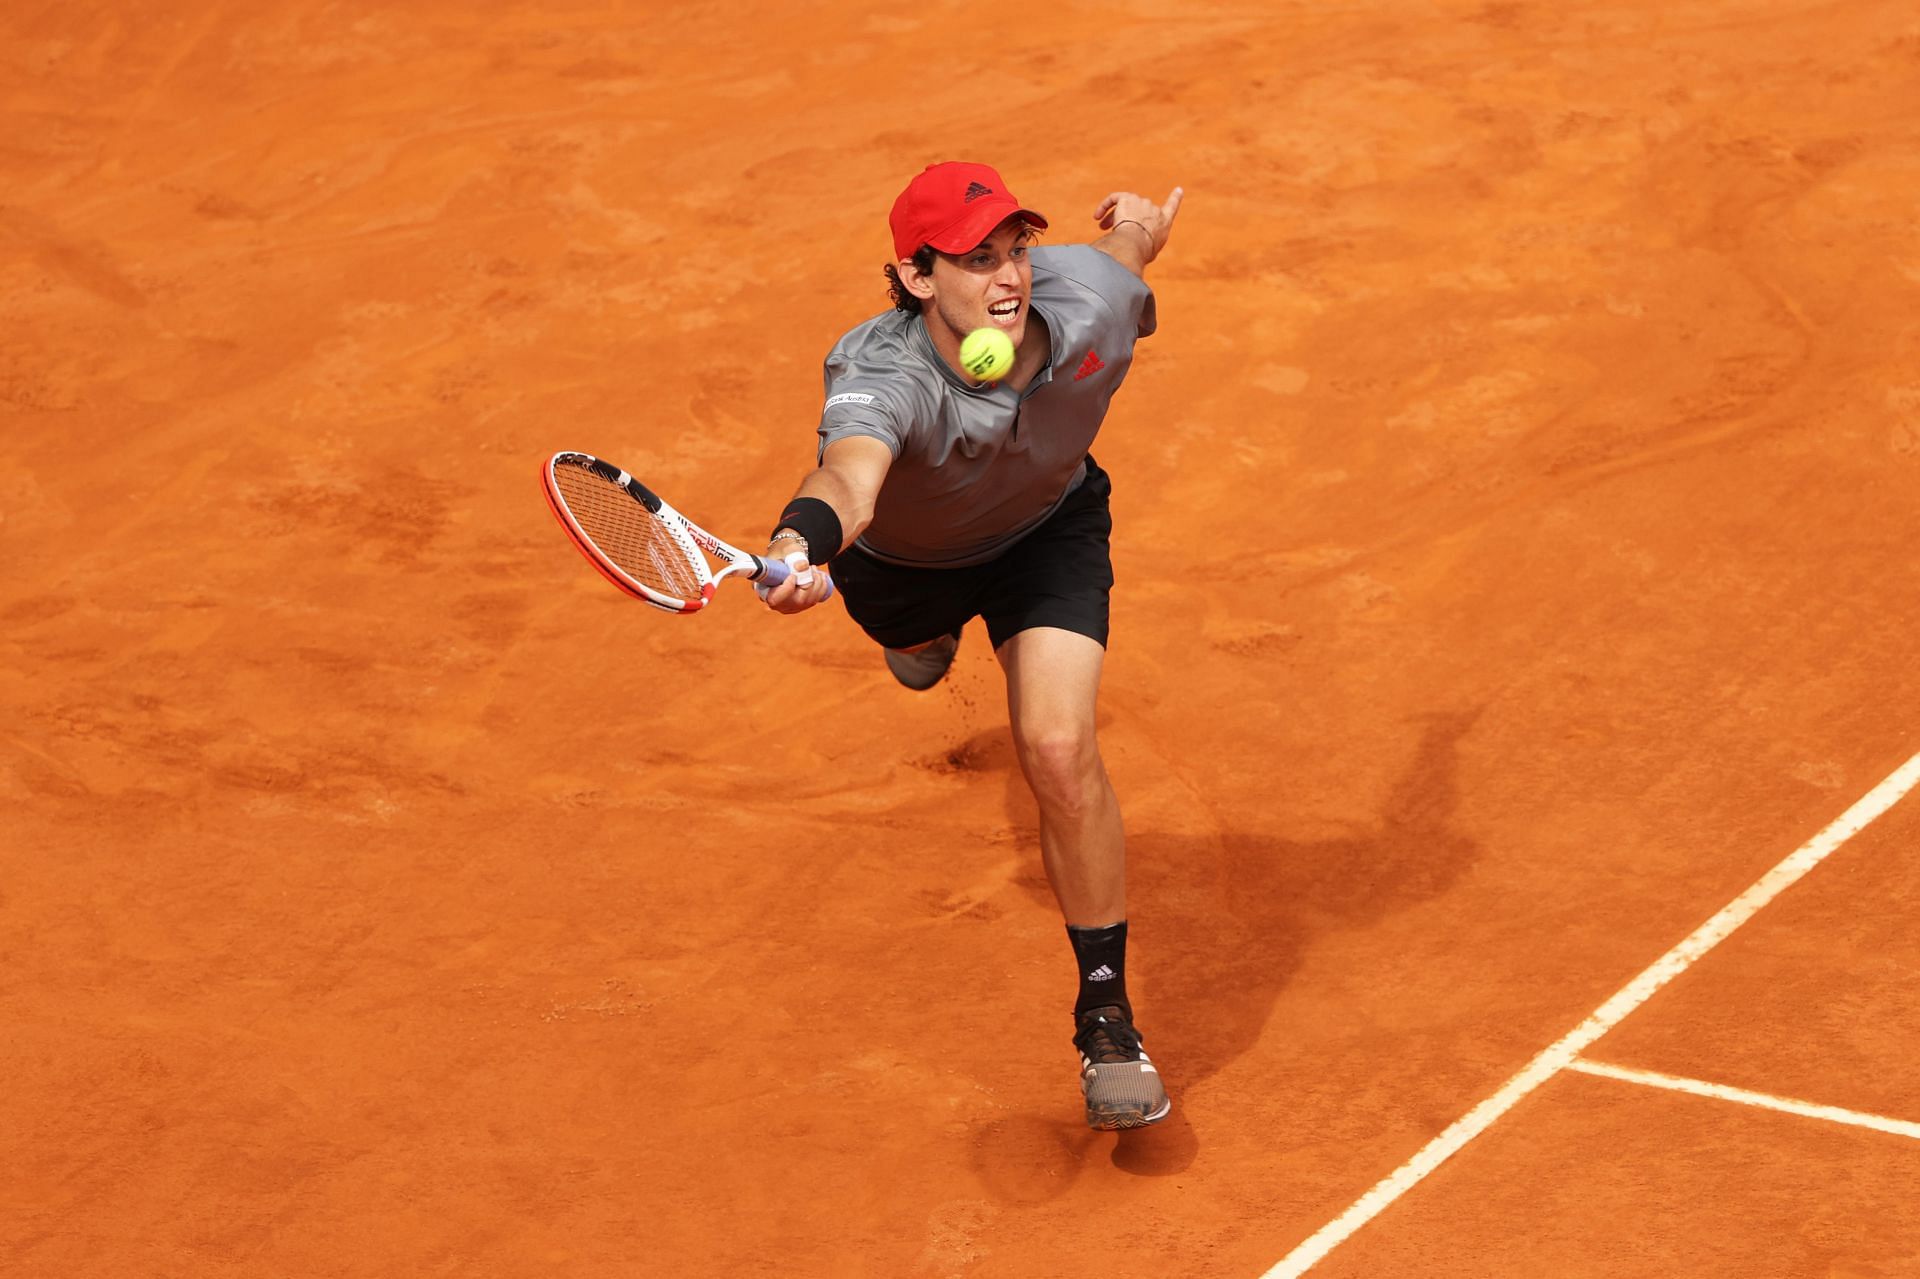 Dominic Thiem pictured at the 2021 Mutua Madrid Open